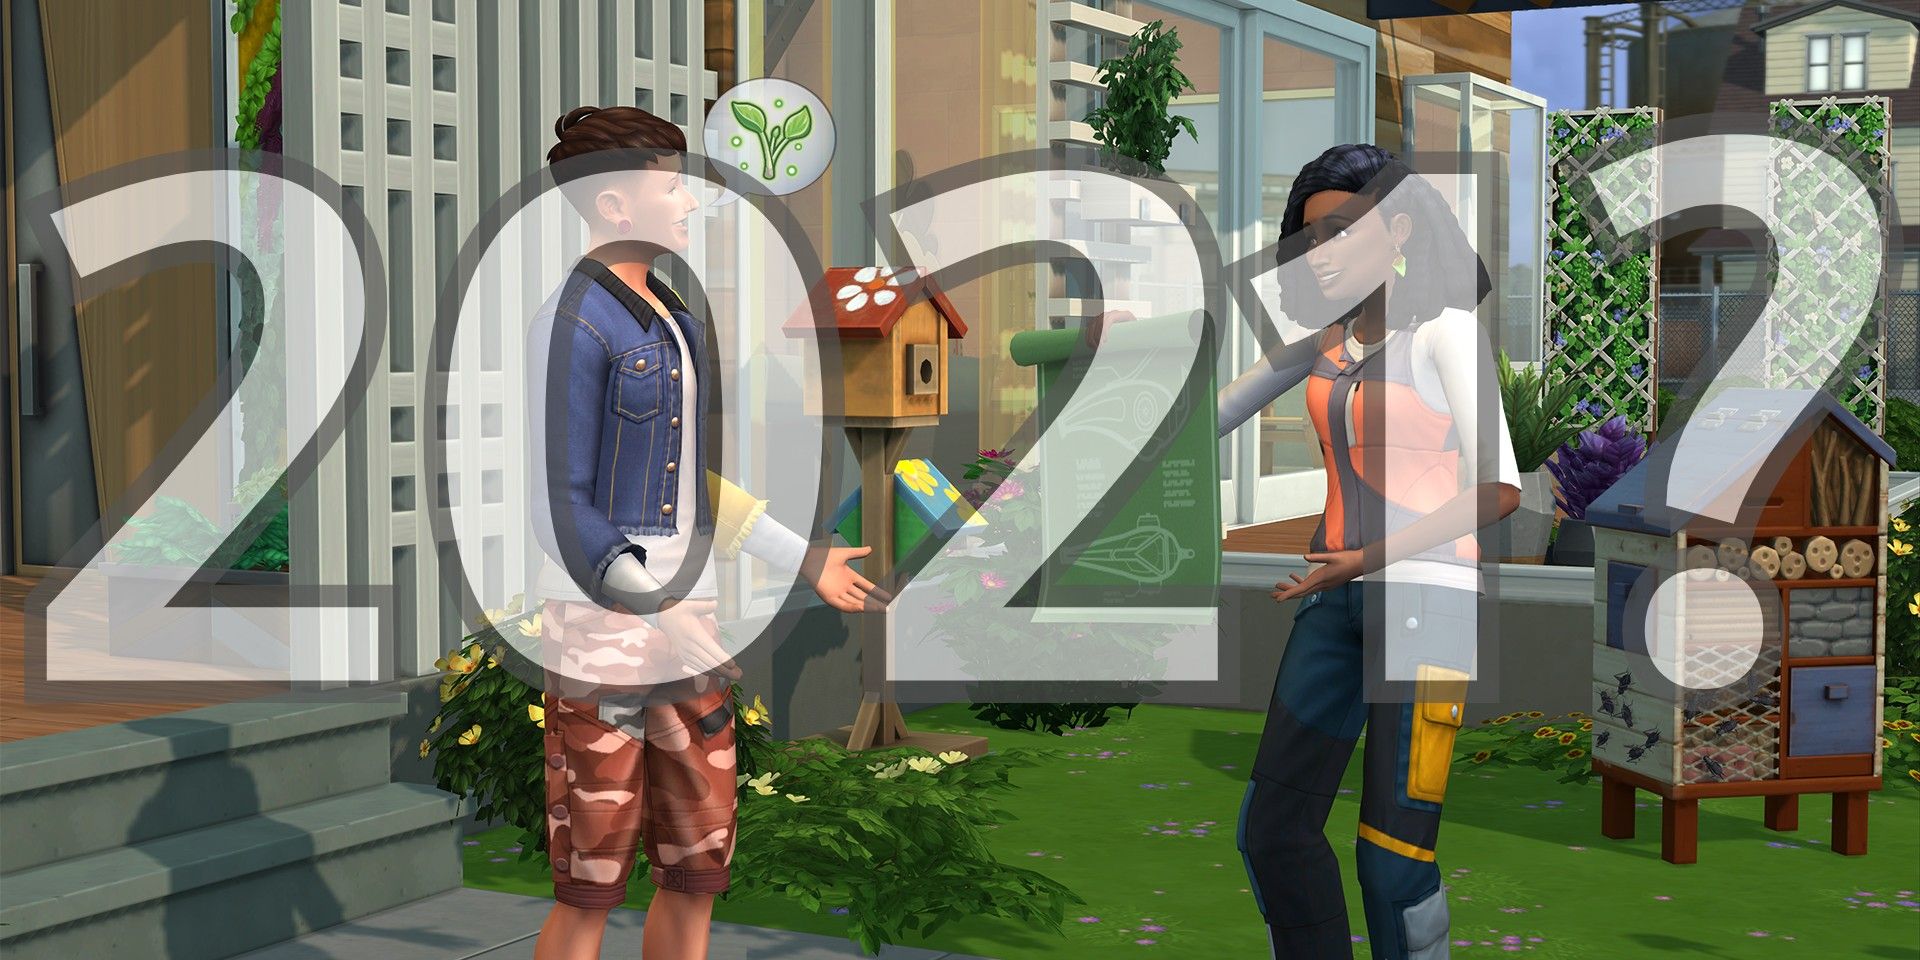 sims 4 free download 2021 pc